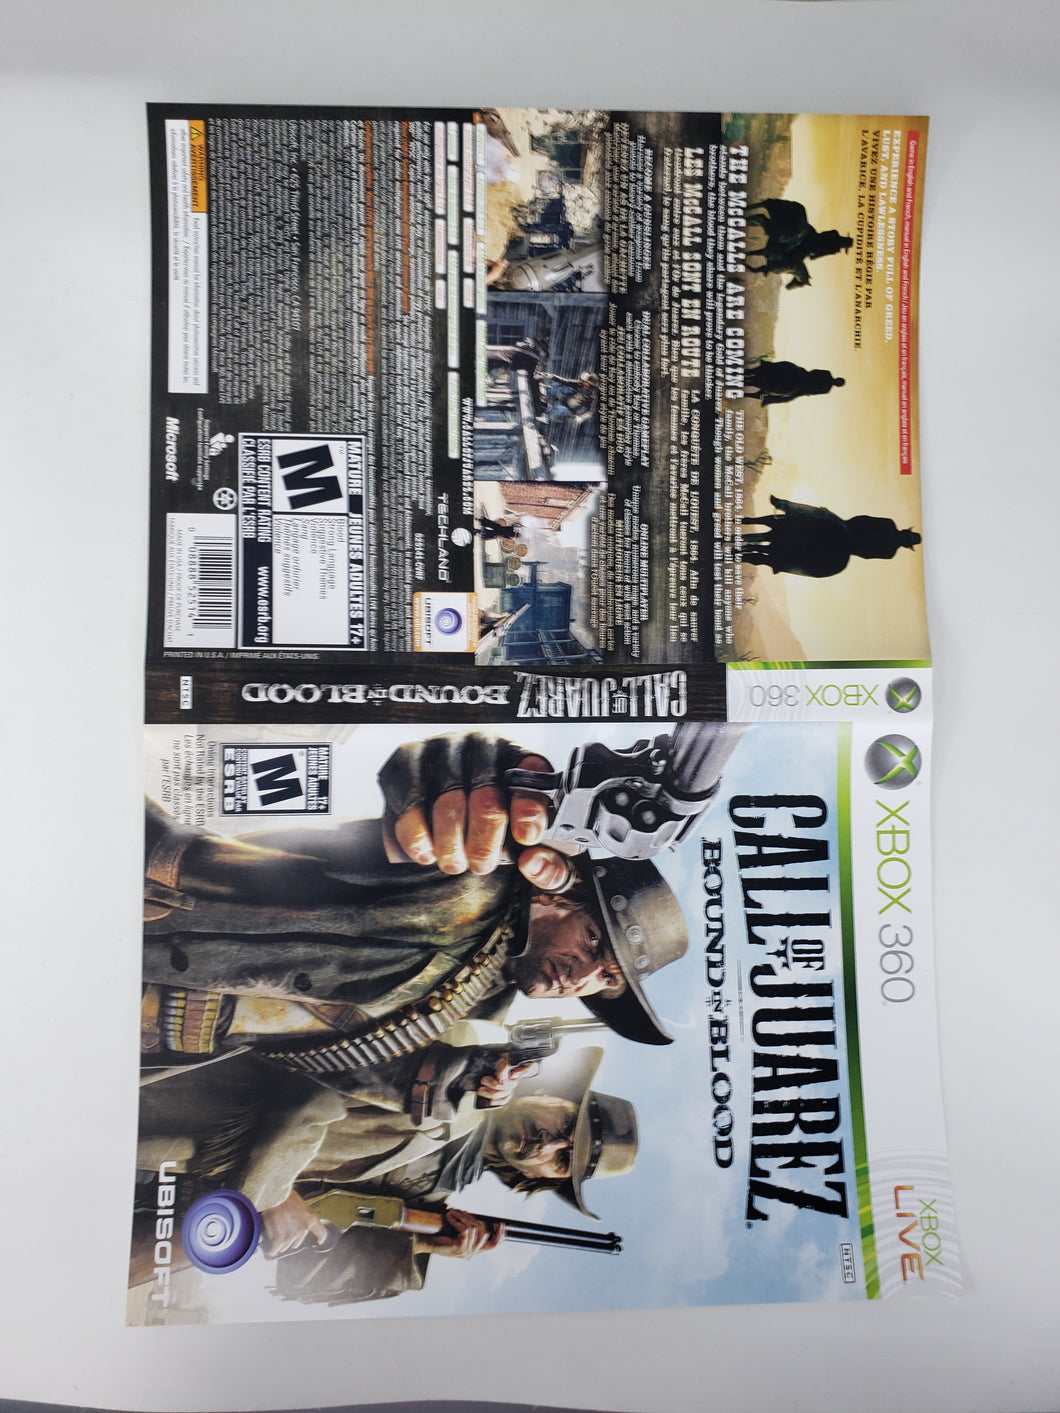 Call of Juarez - Bound in Blood [Cover art] - Microsoft Xbox 360